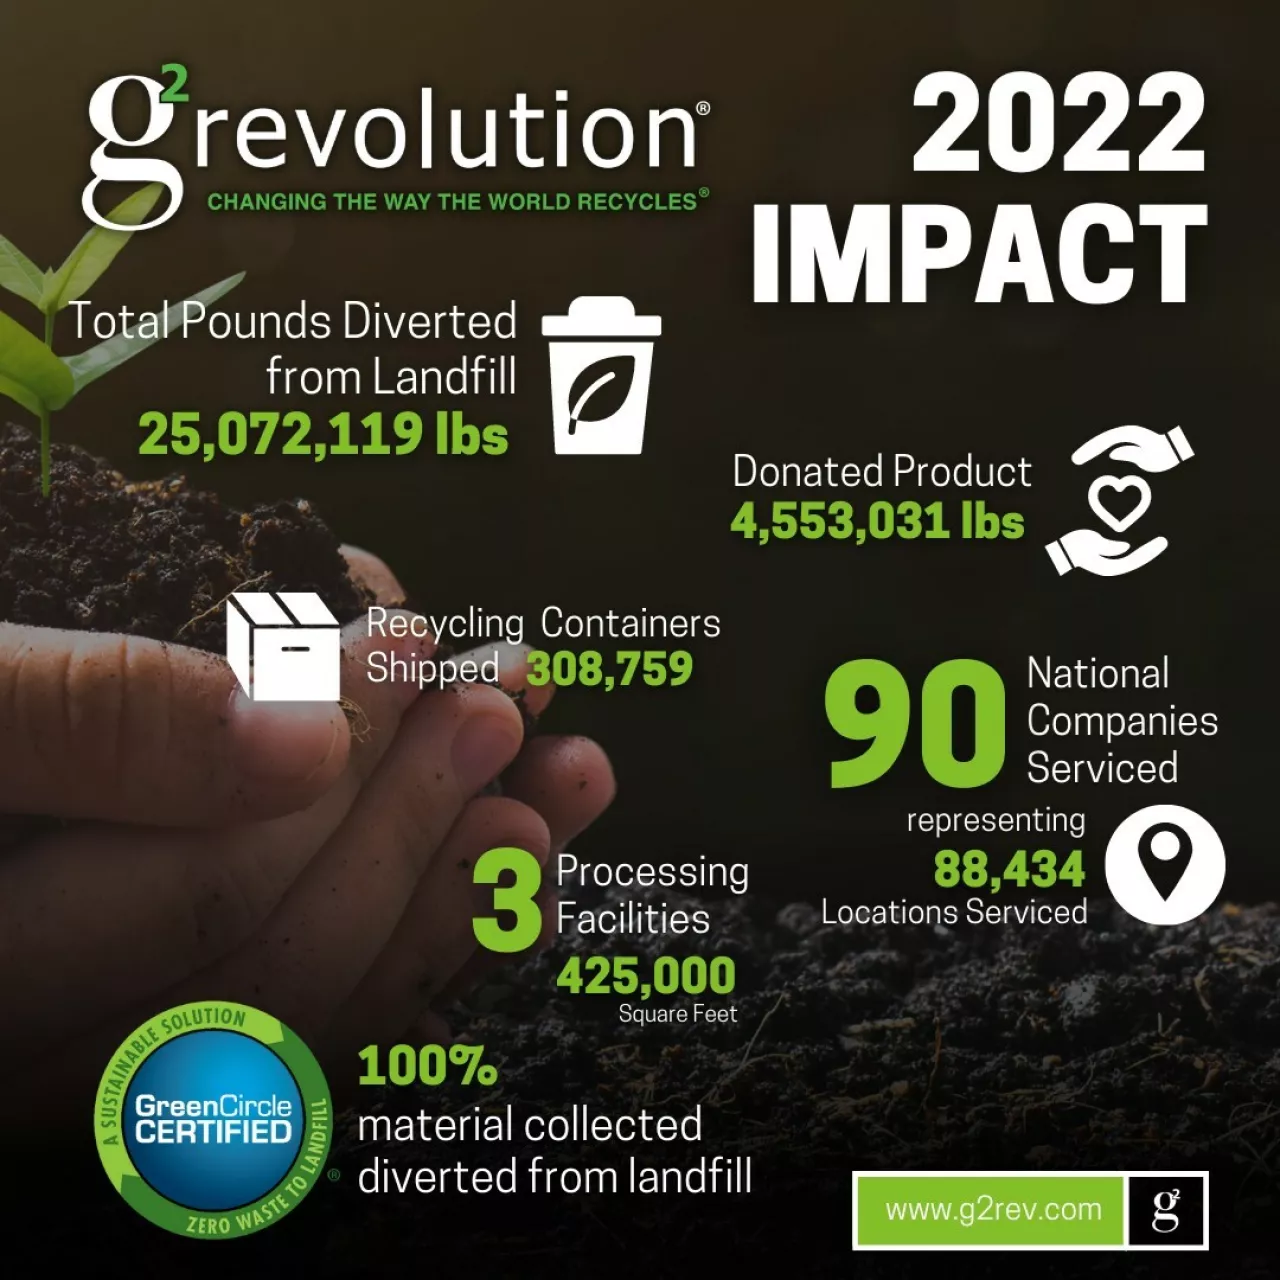 g2’s facilities diverted 100% waste from landfills in 2022. img#1